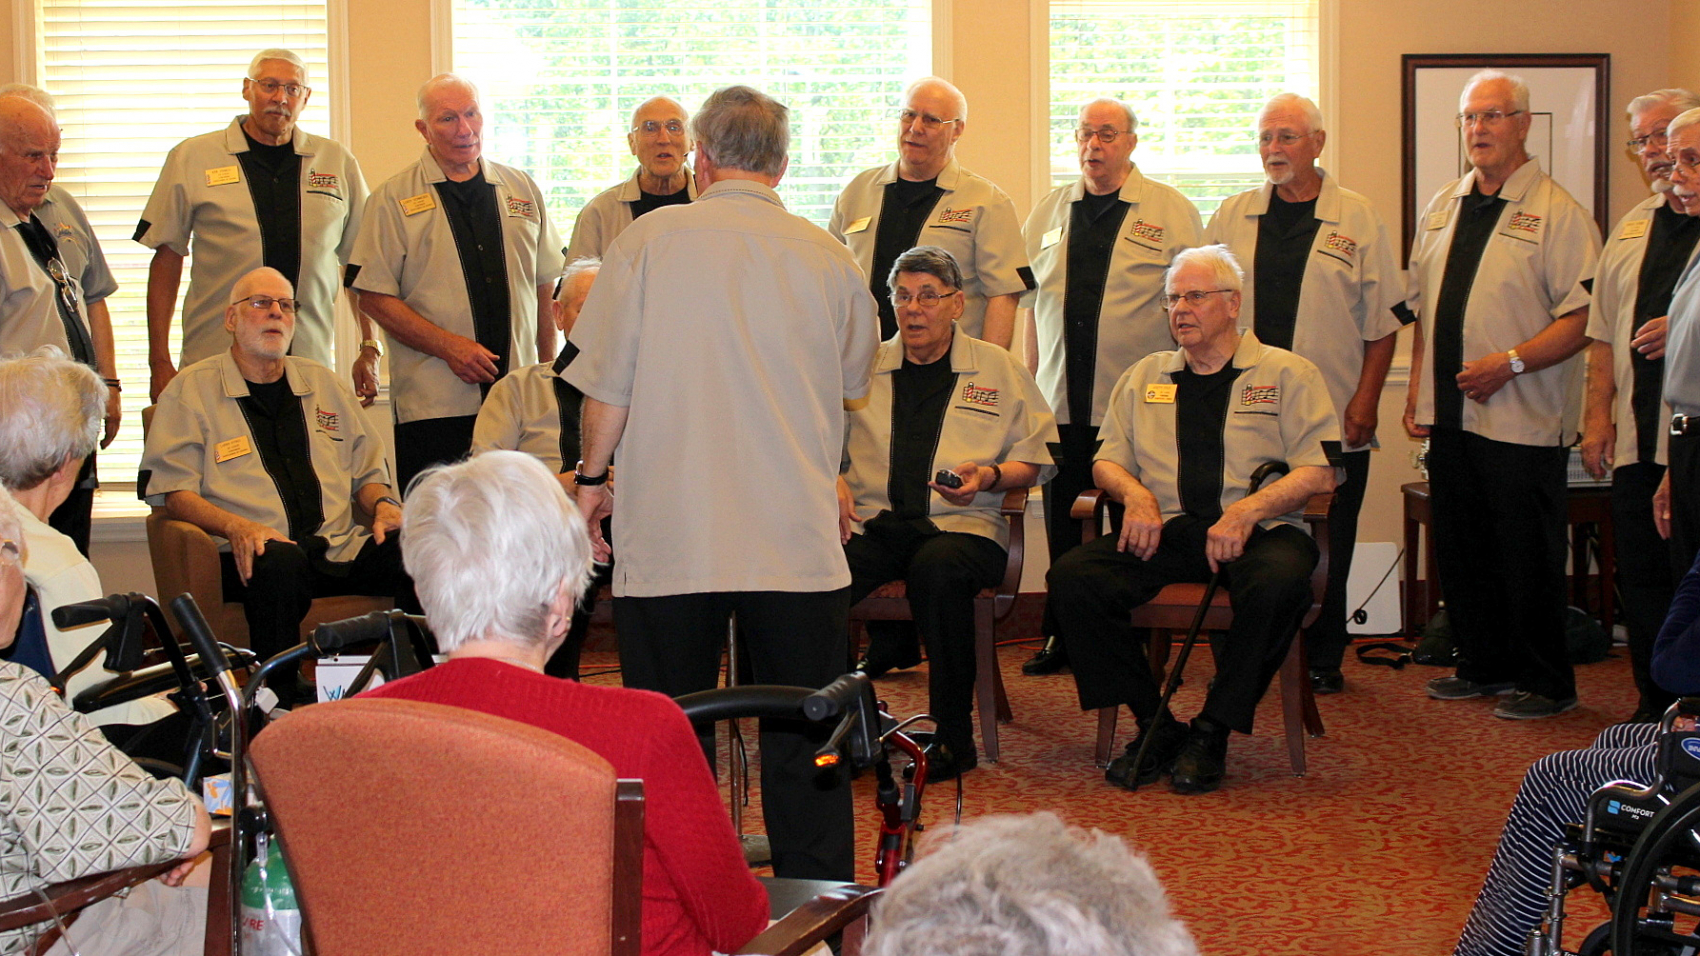 The Gentlemen of Sound came to perform for the residents. The show included a barbershop quartet and a sing-a-long.